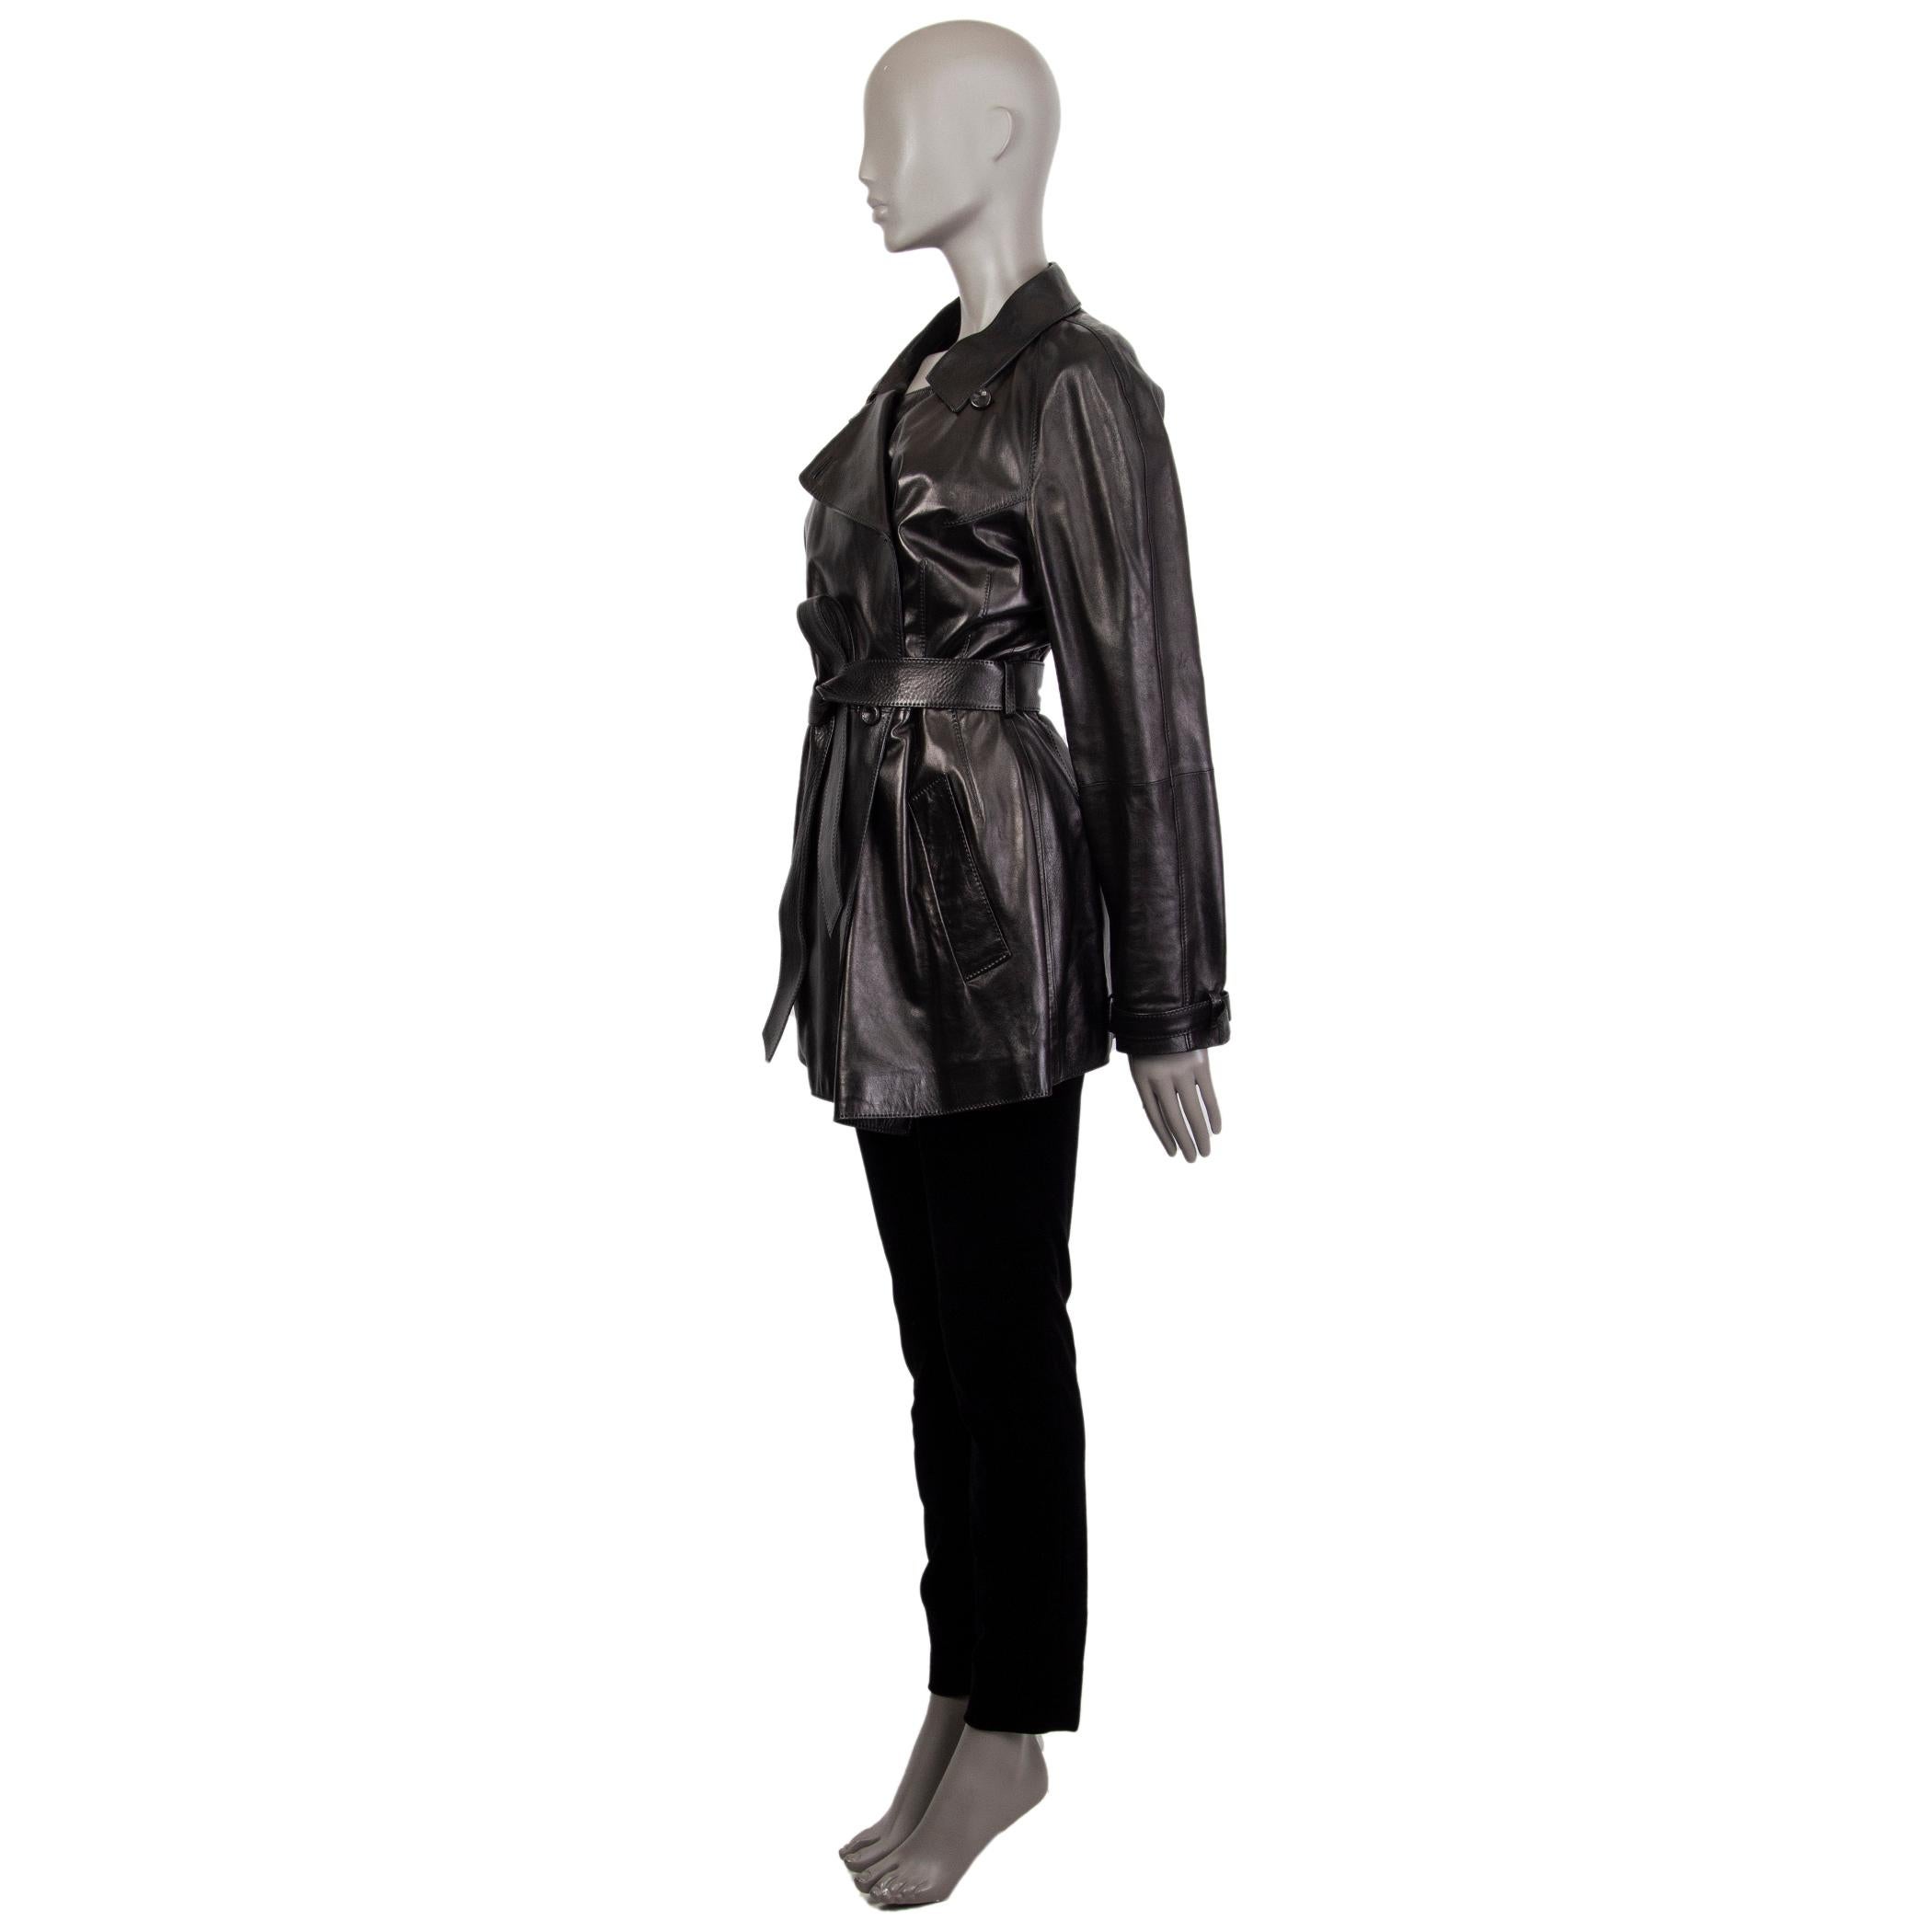 Alexander McQueen double-breasted trench coat in black leather. With flat collar, two pockets on the sides, belt loops around the waist and cuffs, belted cuffs, storm flap on the back, and box pleat on the back. Closes with leather buttons on the